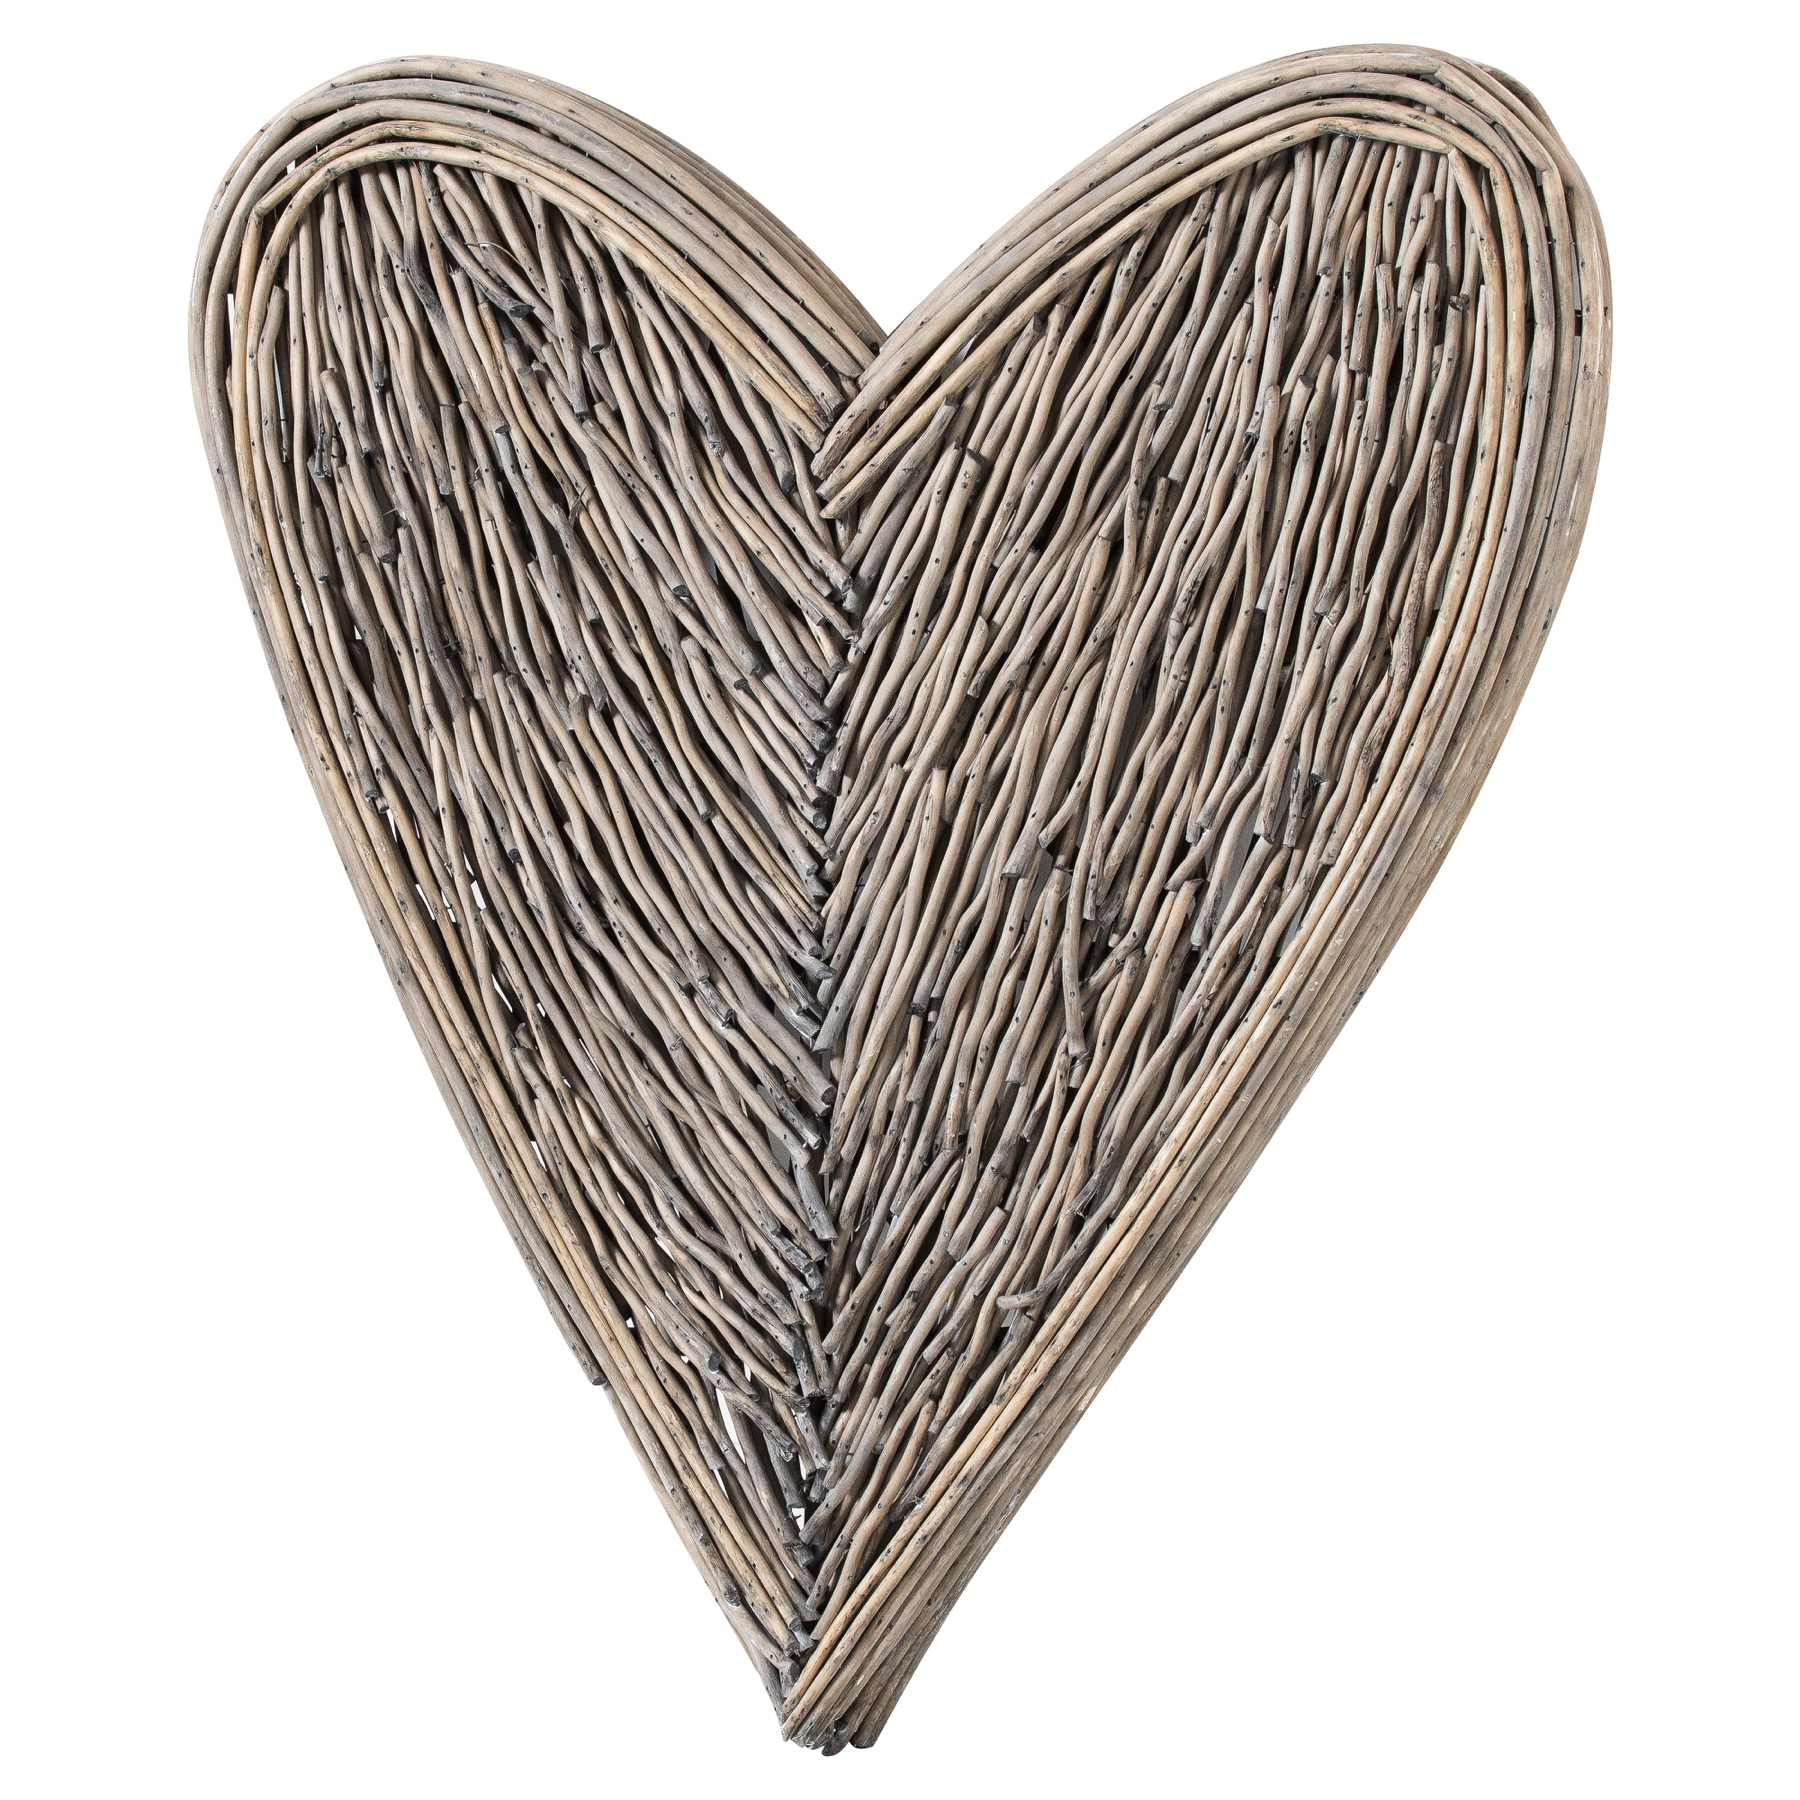 Large Willow Branch Heart - Image 1